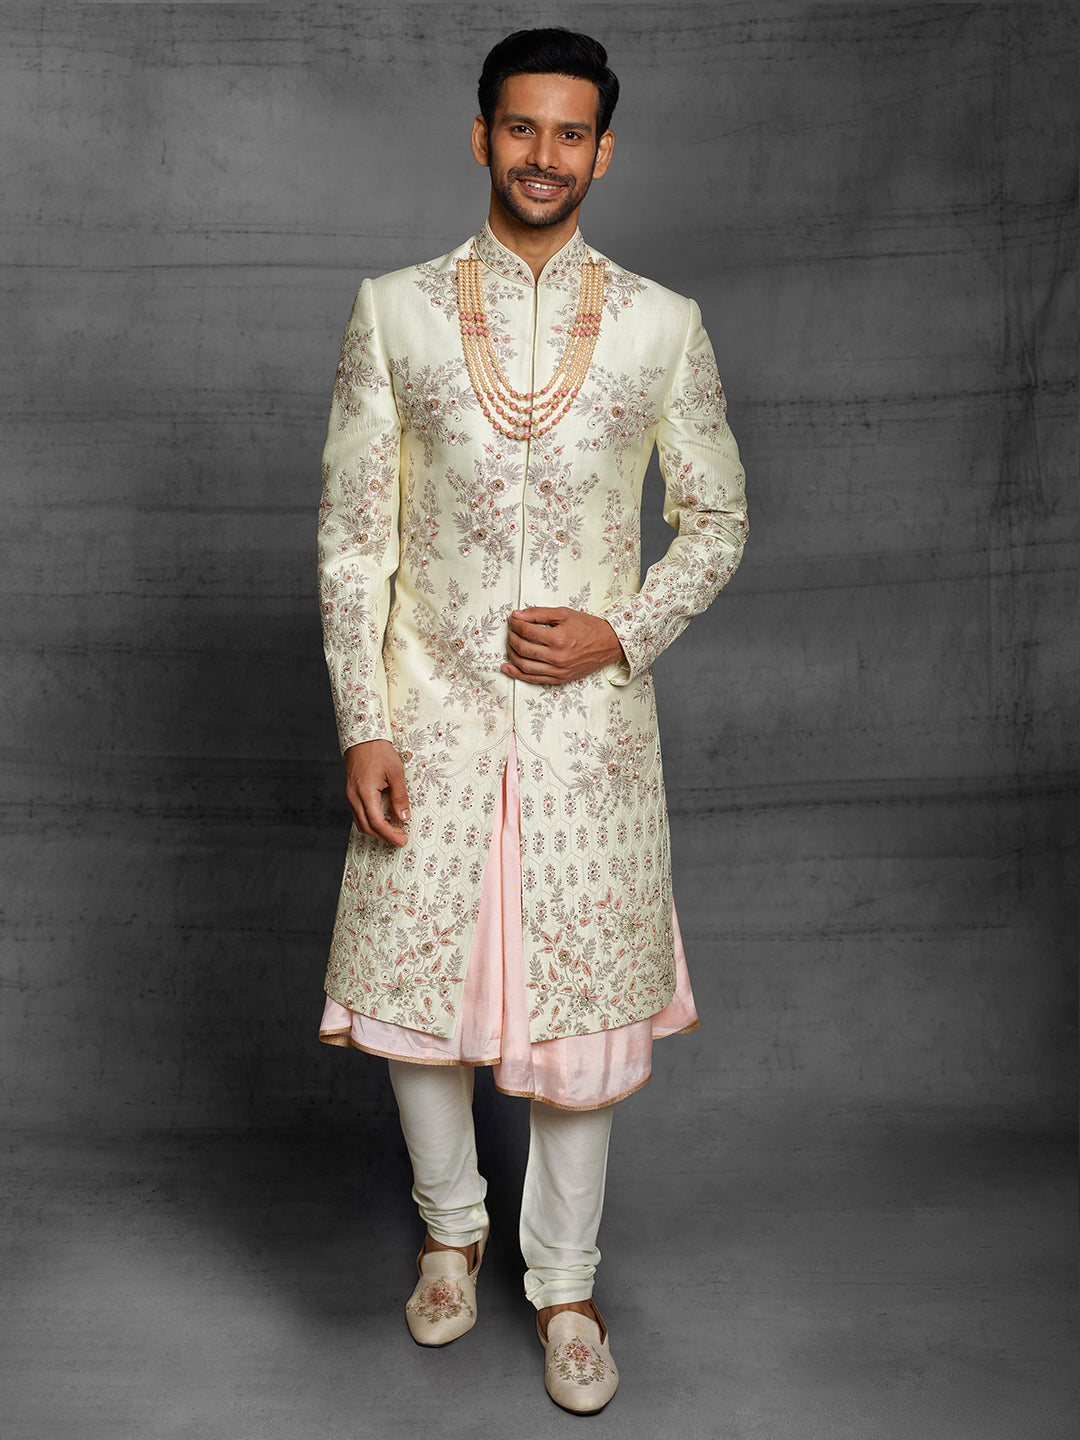 Gold sherwani with floral symmetry design